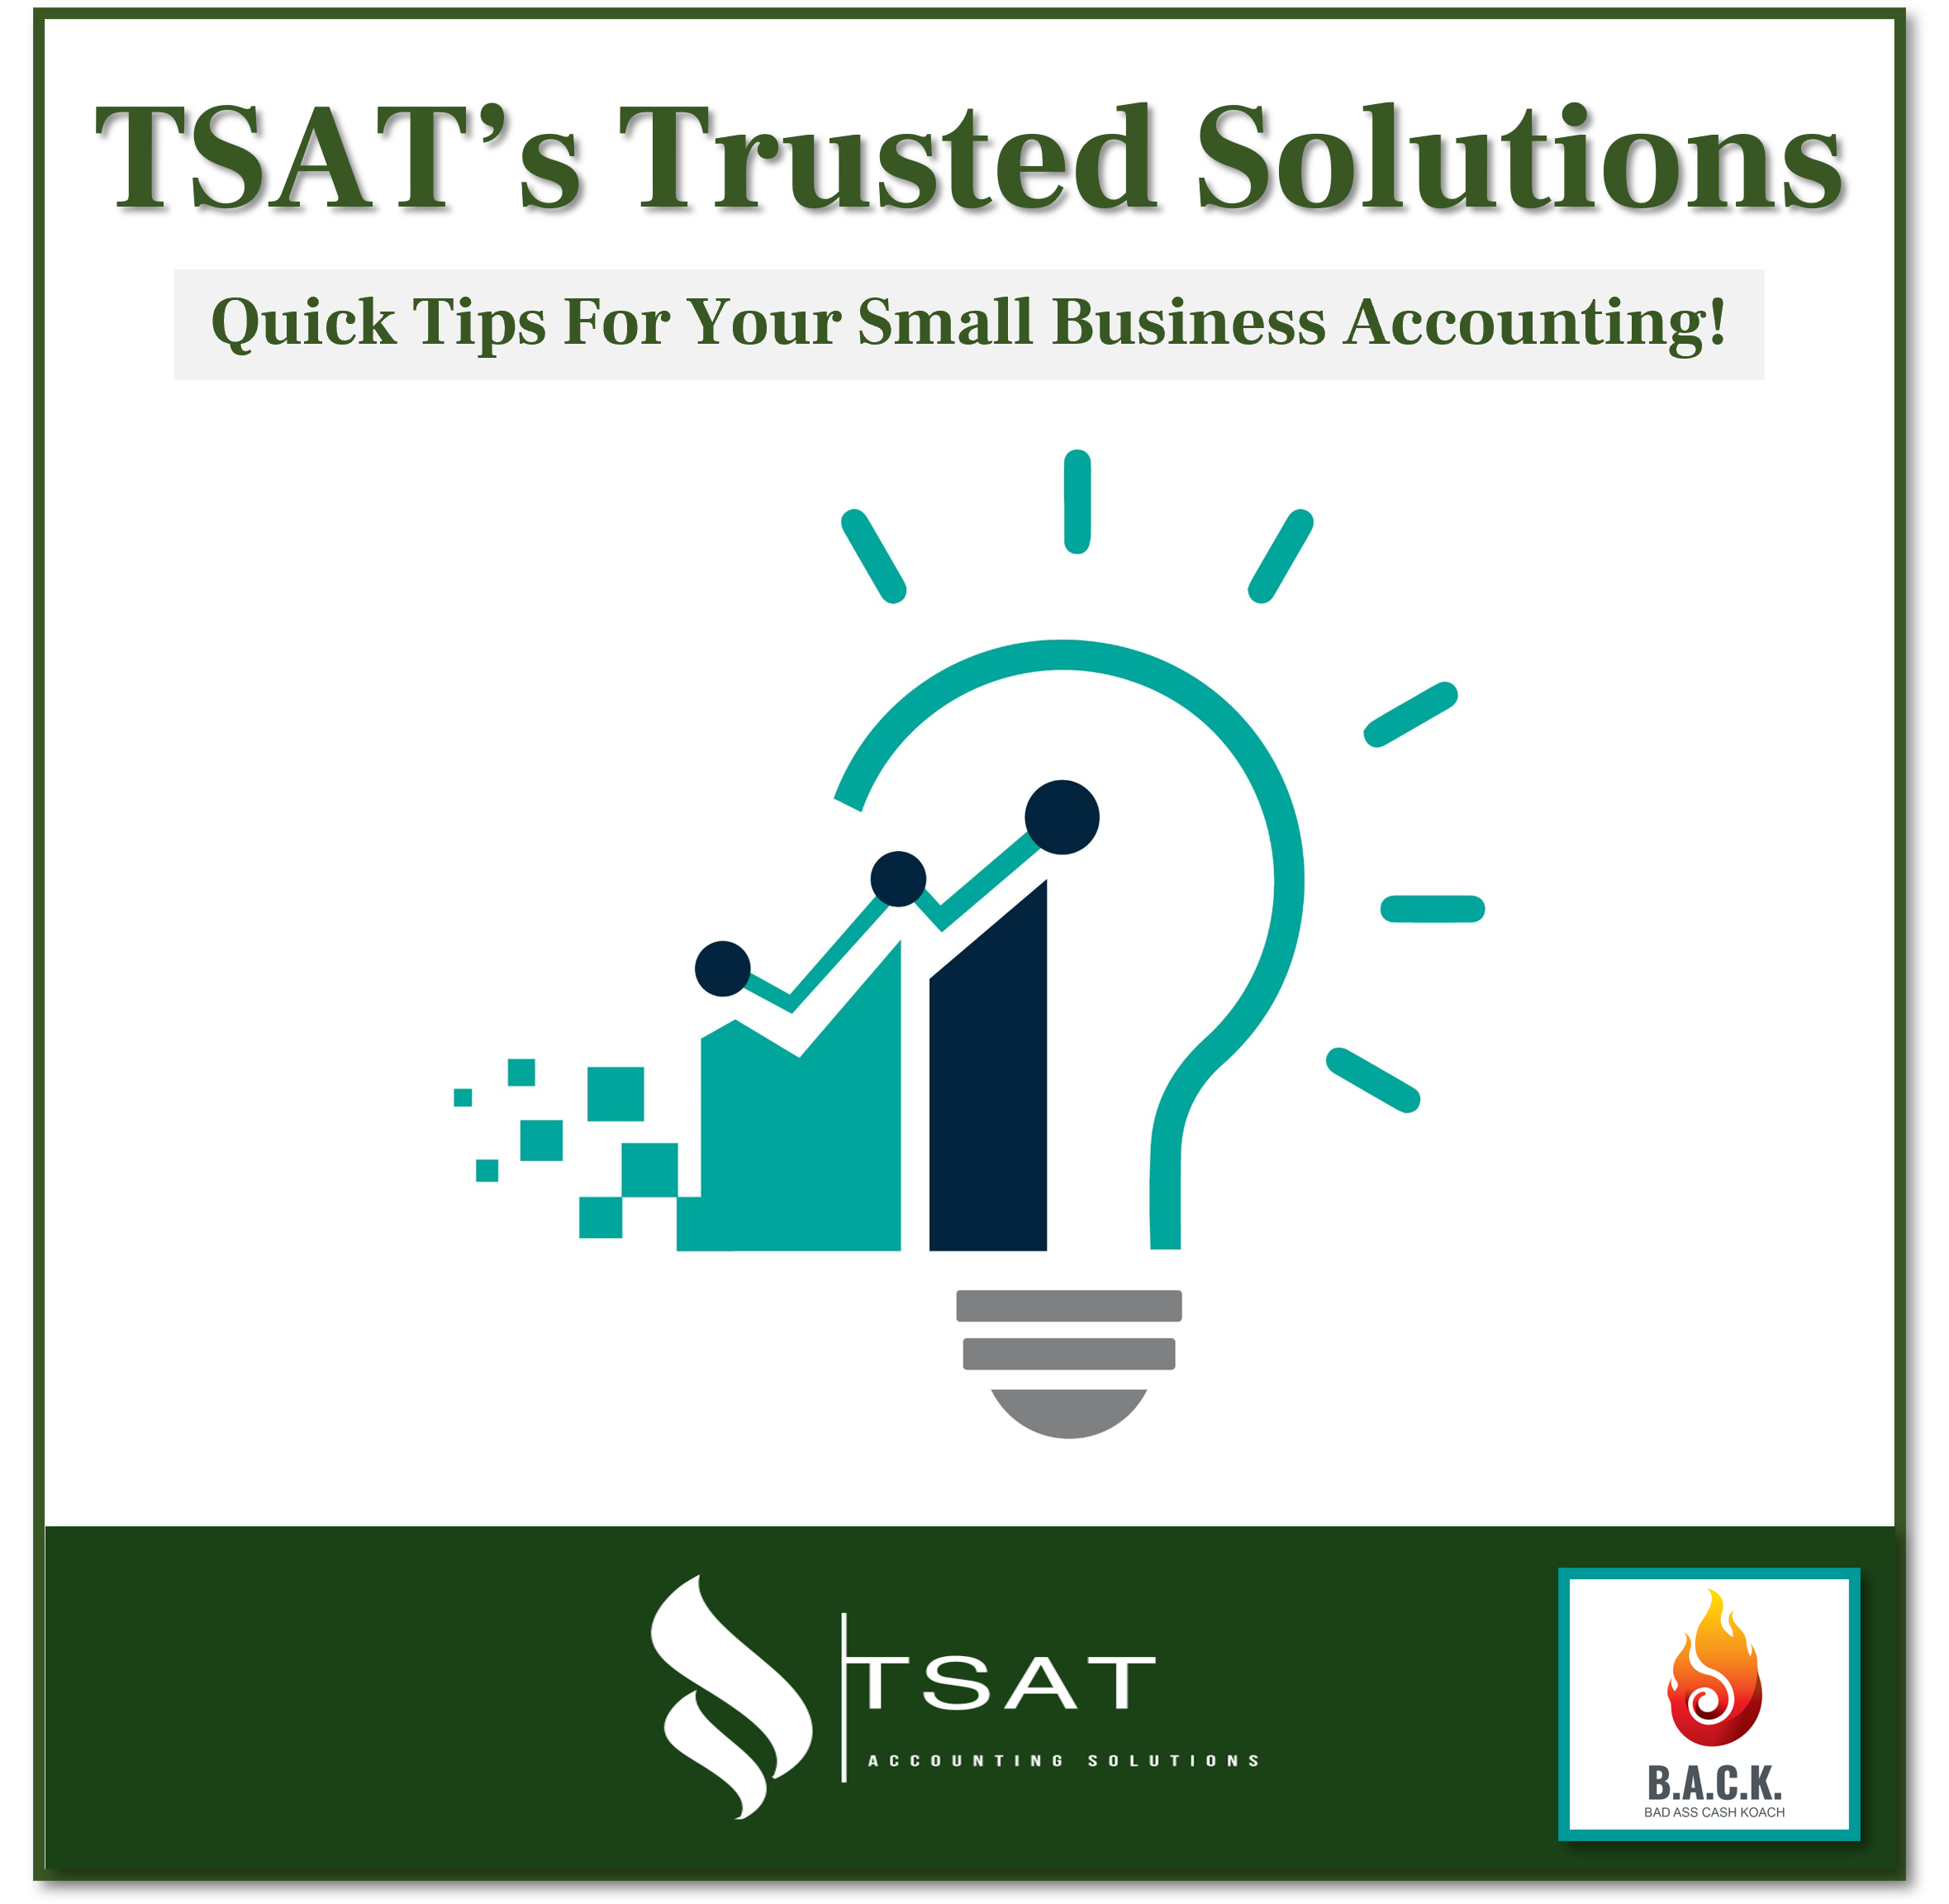 Quick Tips For Your Small Business Accounting!